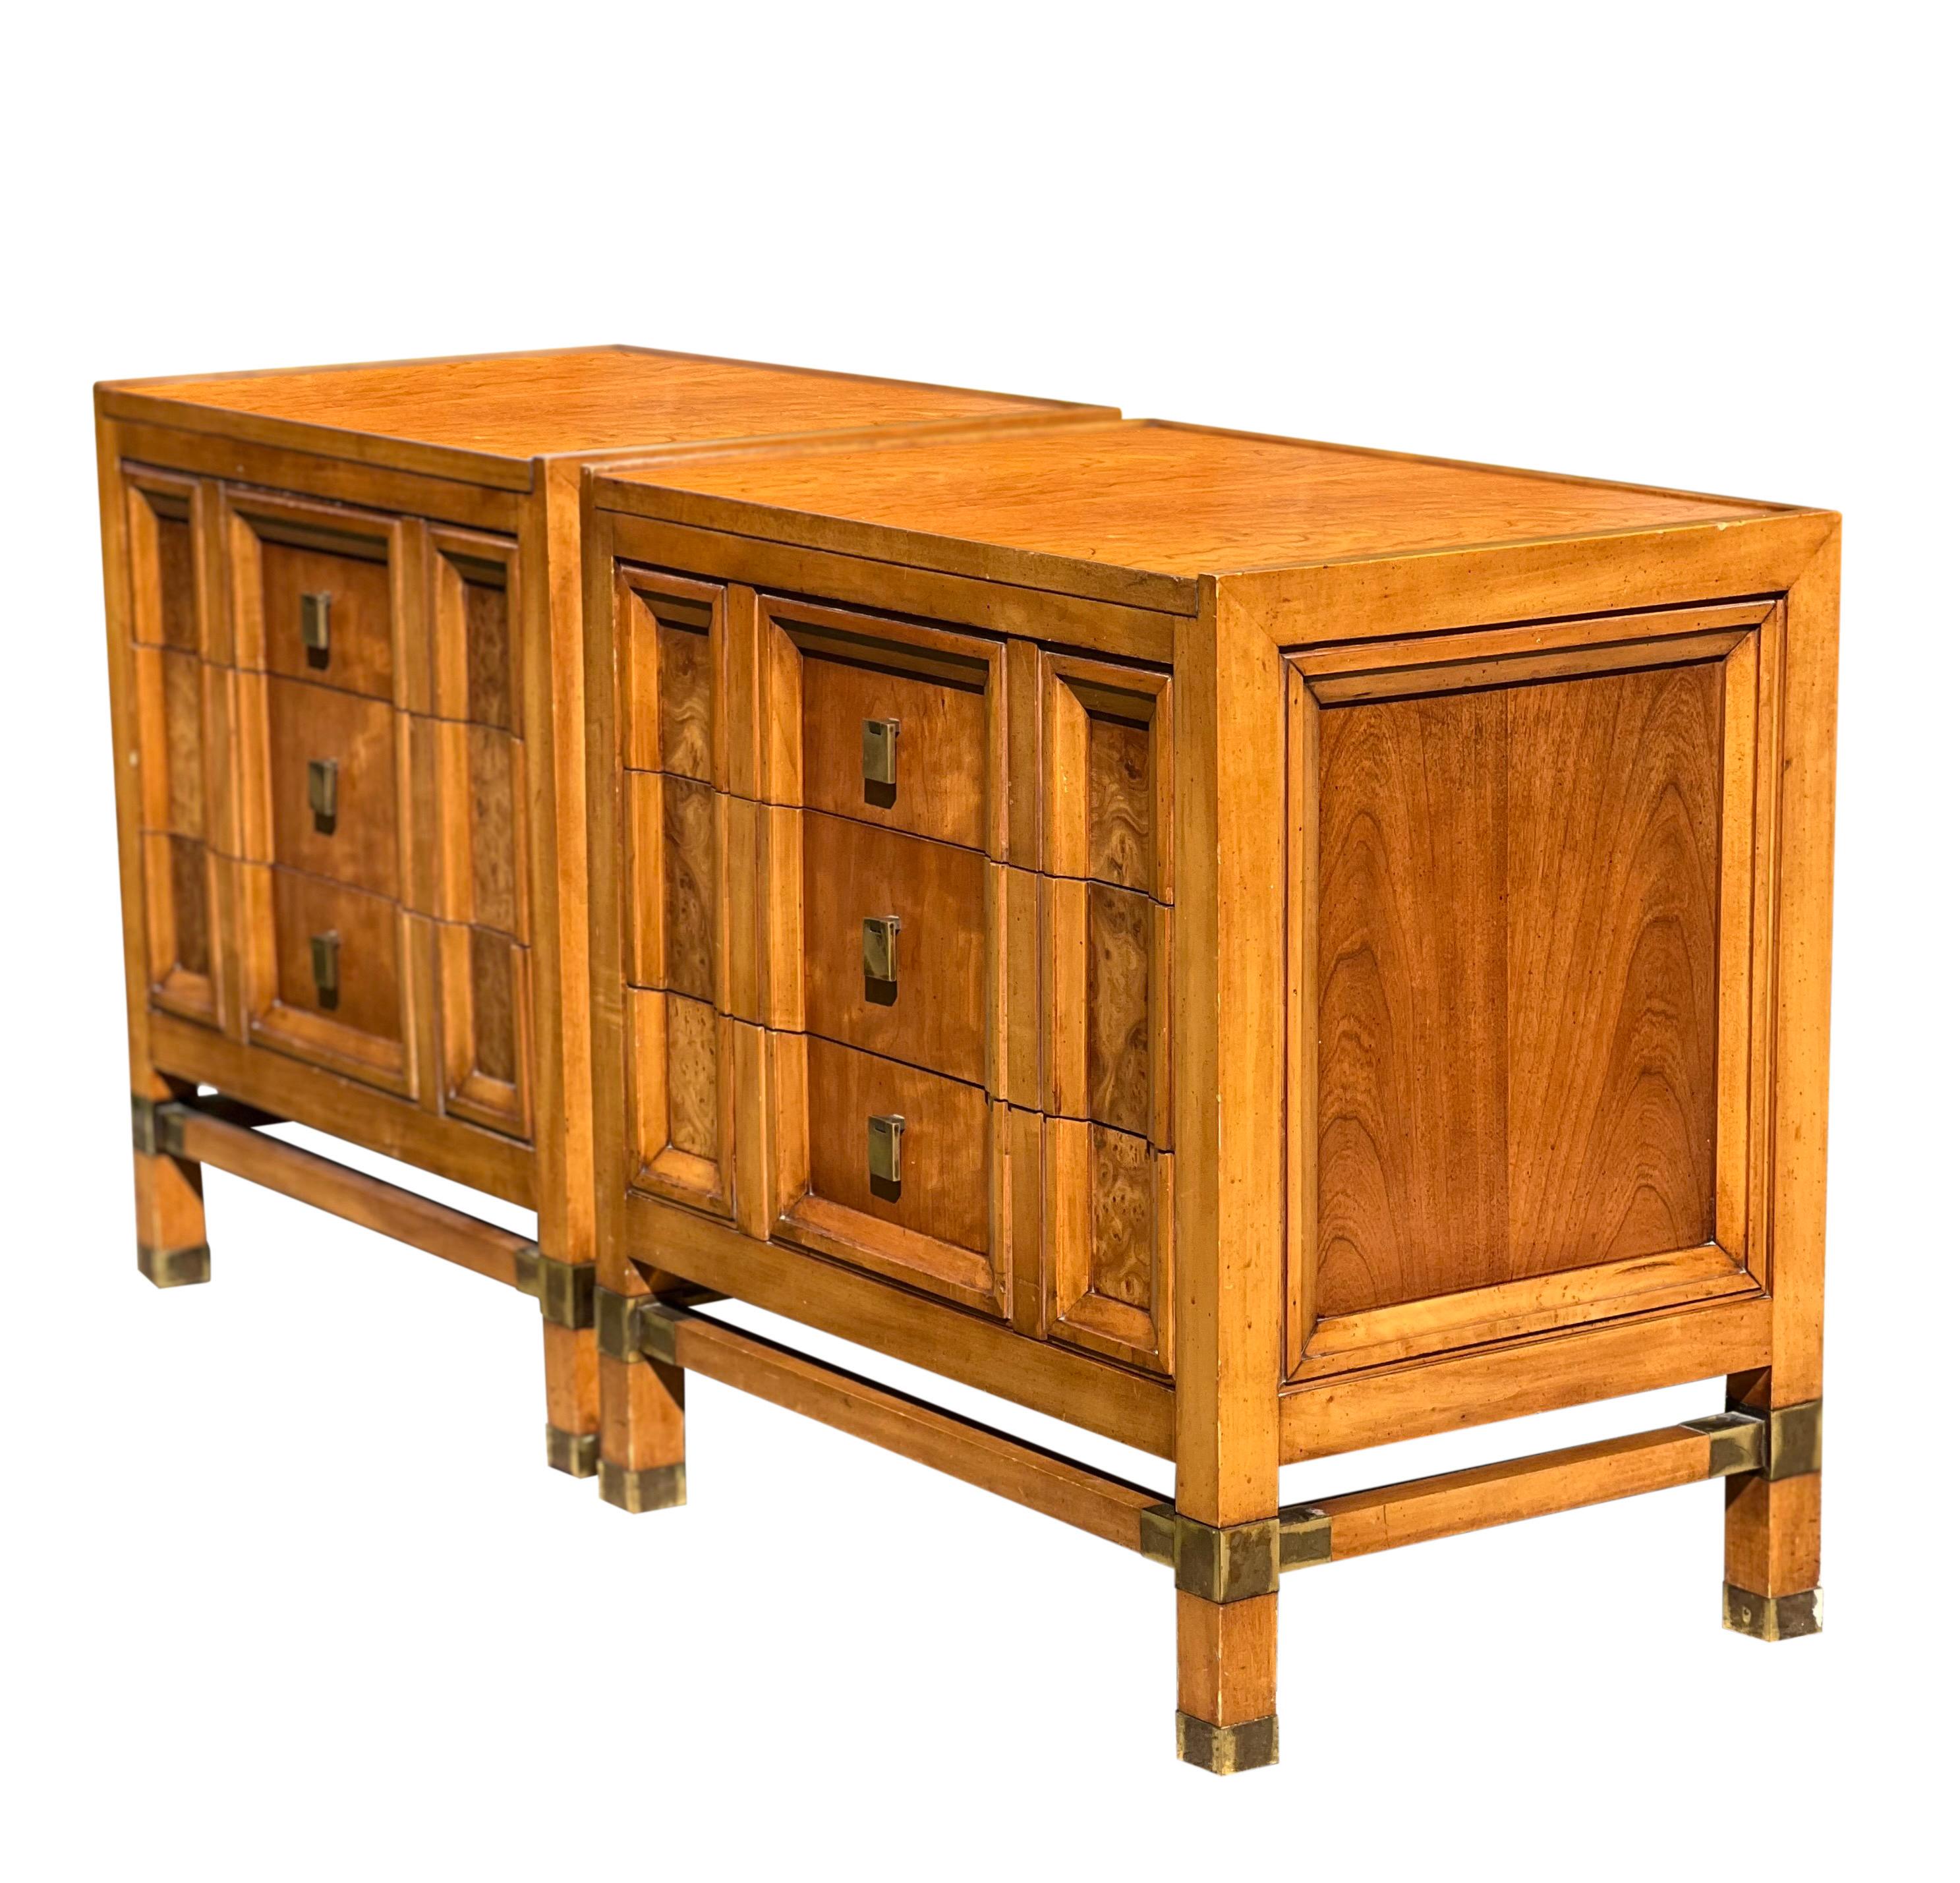 Exceptional pair of mid-century Mastercraft style nightstands by J.L. Metz. 

The stands are weathered cherry with lovely burl accent panels. They feature three clean, dovetail drawers with rectangular brass drop pulls. Unique brass detail on the